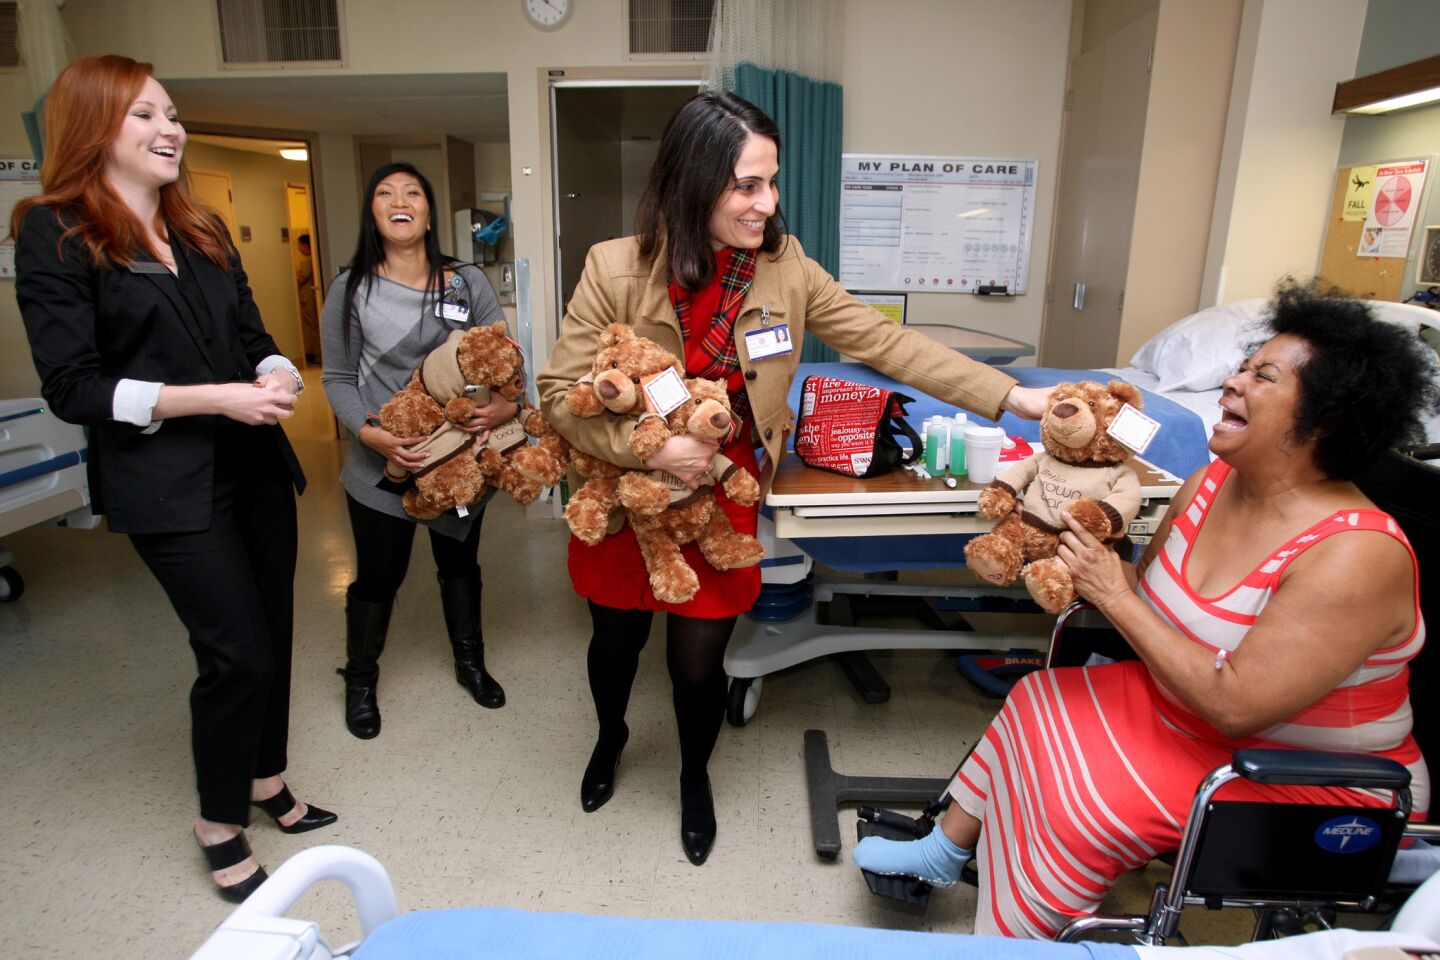 Bloomingdale's public relations manager Kelli Daley, left, Glendale Adventist Medical Center's Emillie Battig, RN, Director Nursing Admin., center, and Alina Dersarkissian, GAMC's director of marketing, present excited patient Cassandra Cañada, right, with a teddy bear for the holidays, at GAMC in Glendale on Wednesday, December 23, 2015. Sixty stuffed bears were handed out to patients throughout the hospital. A donor gave 30 bears and Bloomingdale's match the gift with another 30 bears.